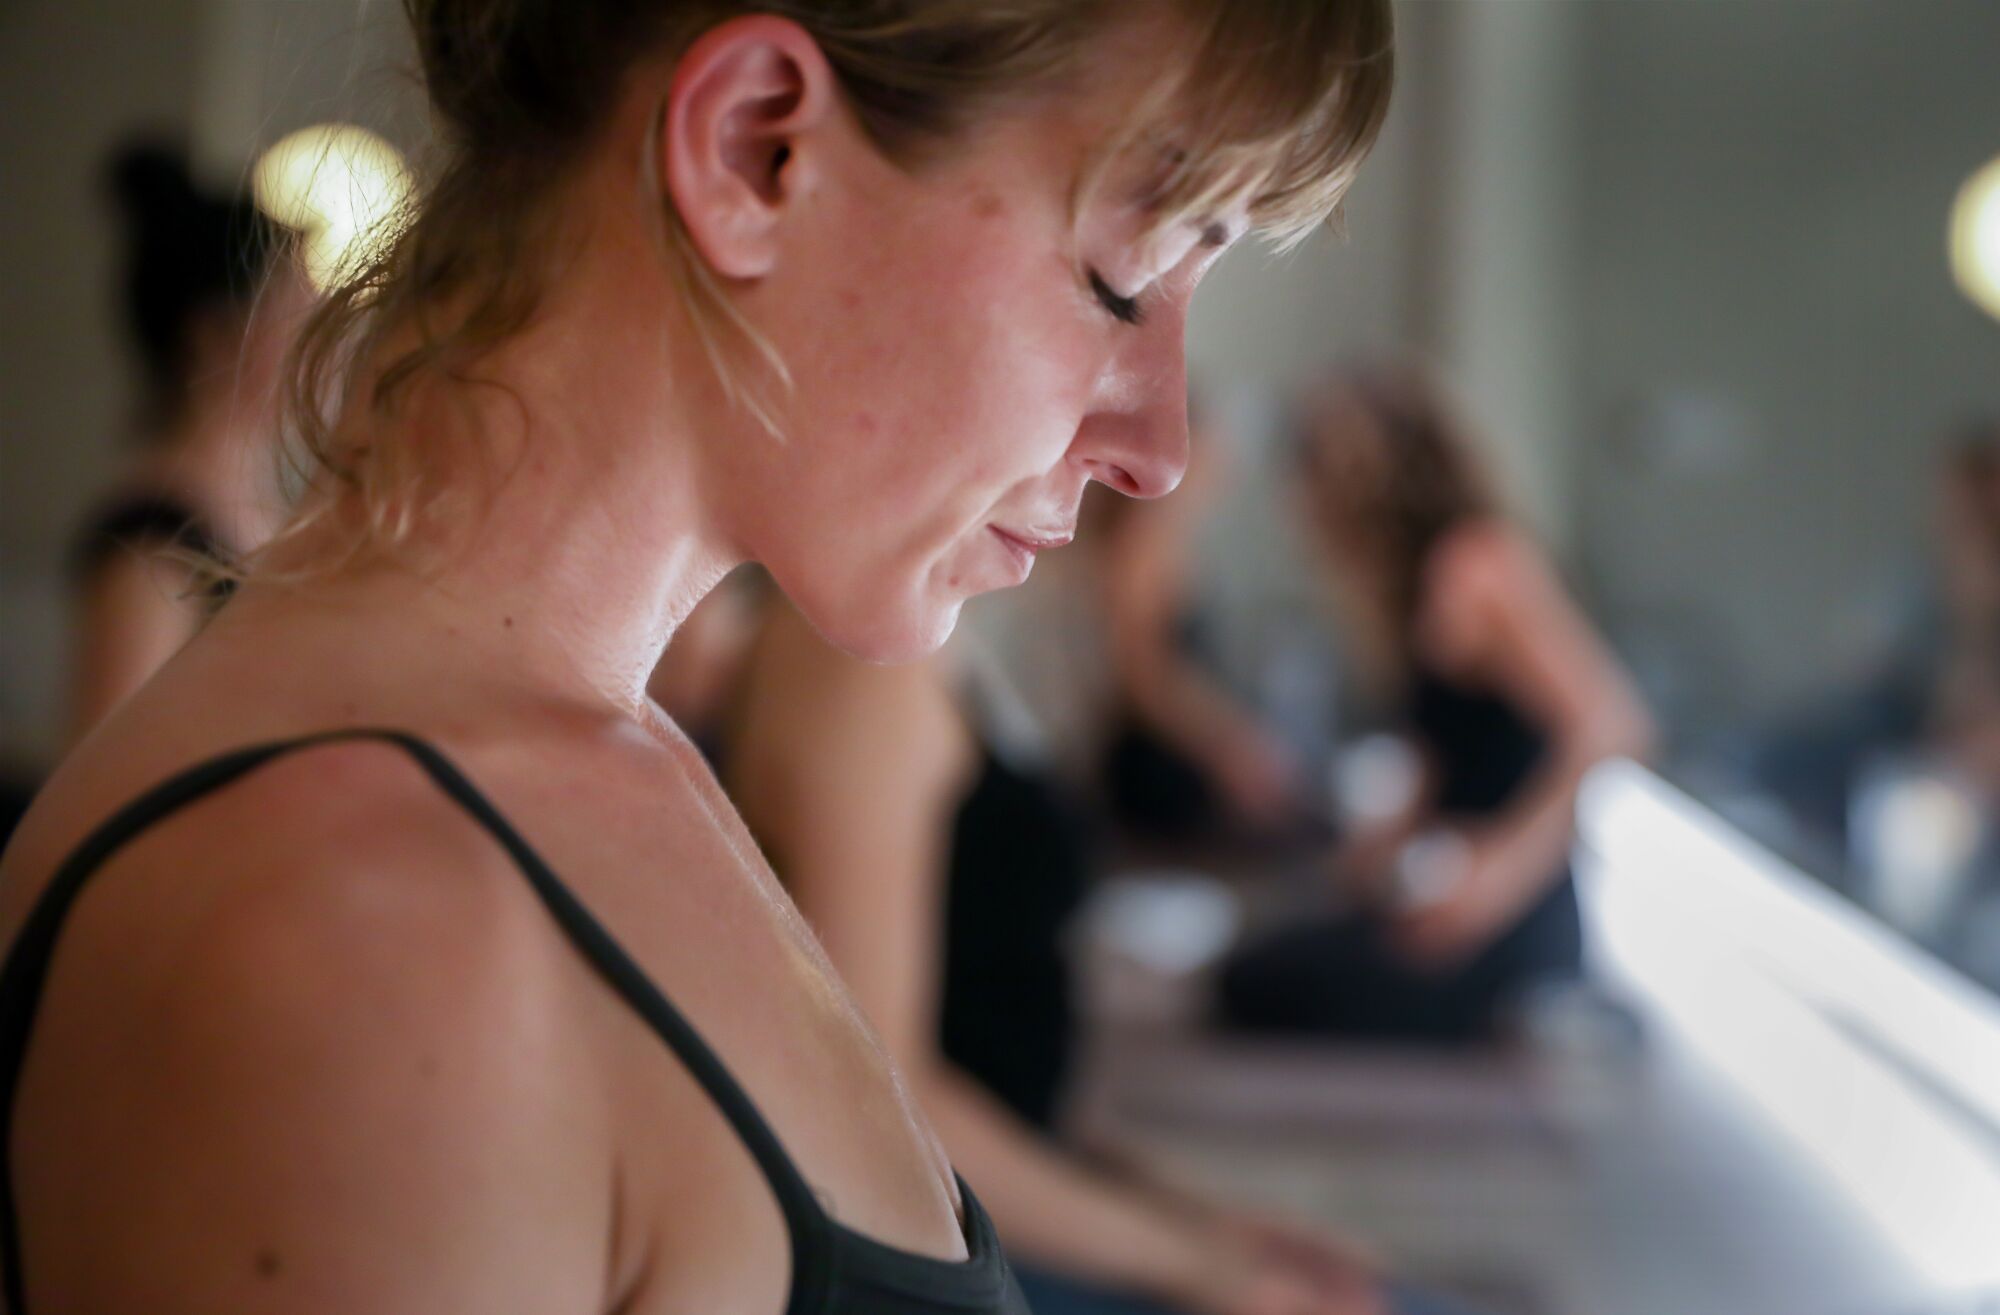 A close-up of a woman with her eyes closed in an exercise class